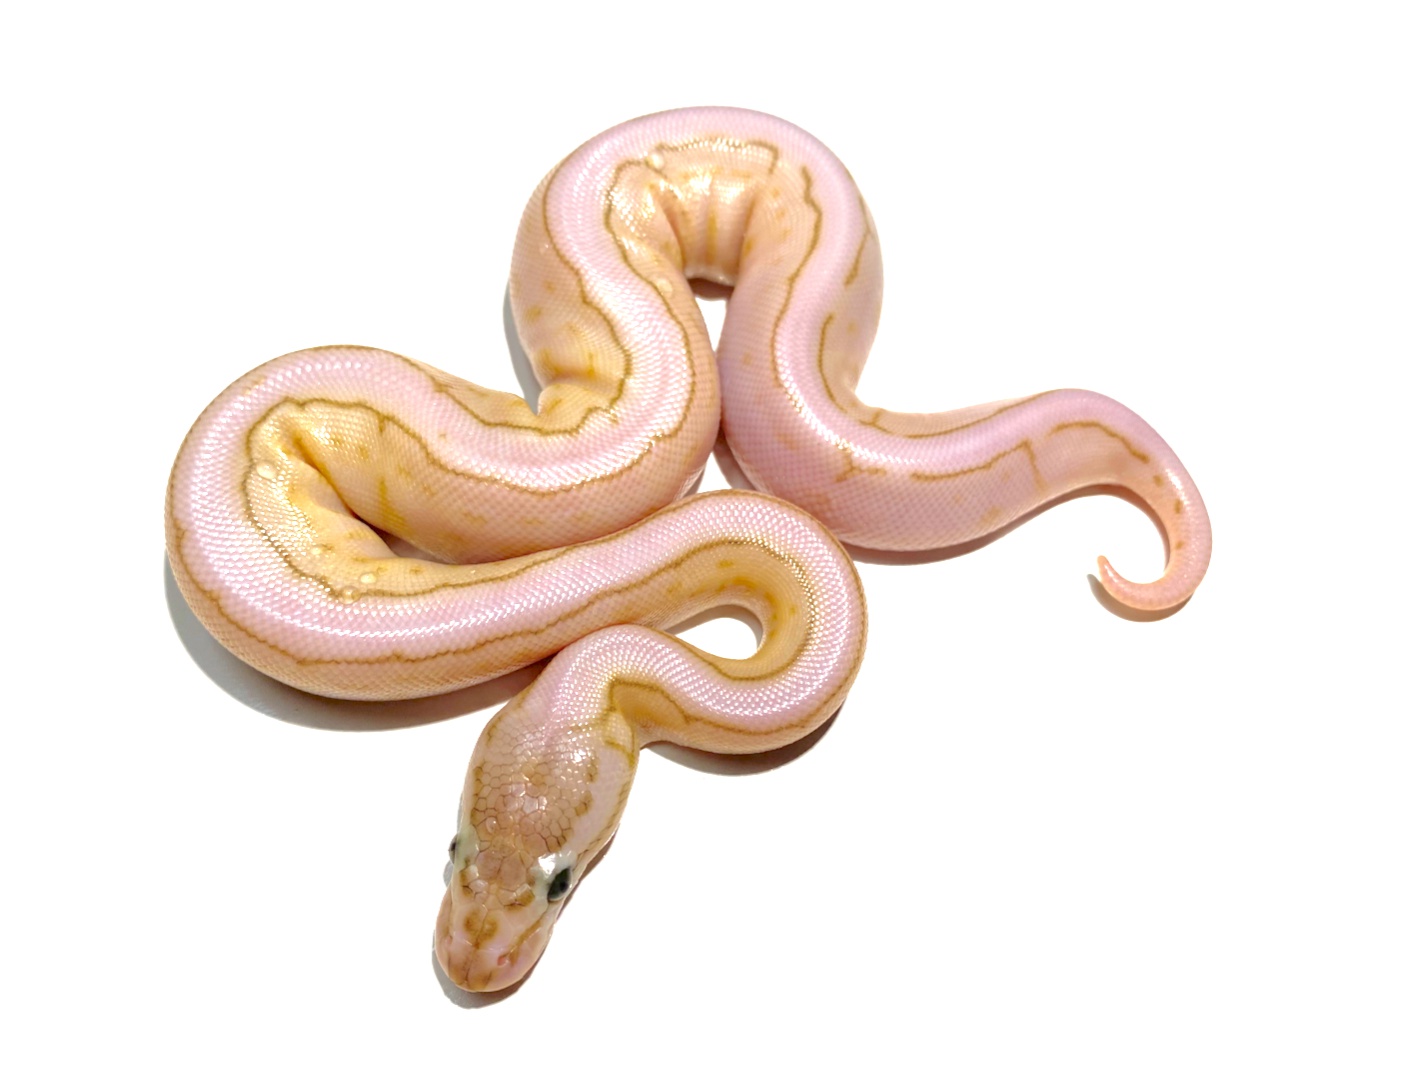 Butter-Daddy Leopard Spinner Ball Python by Tornado Alley Reptiles